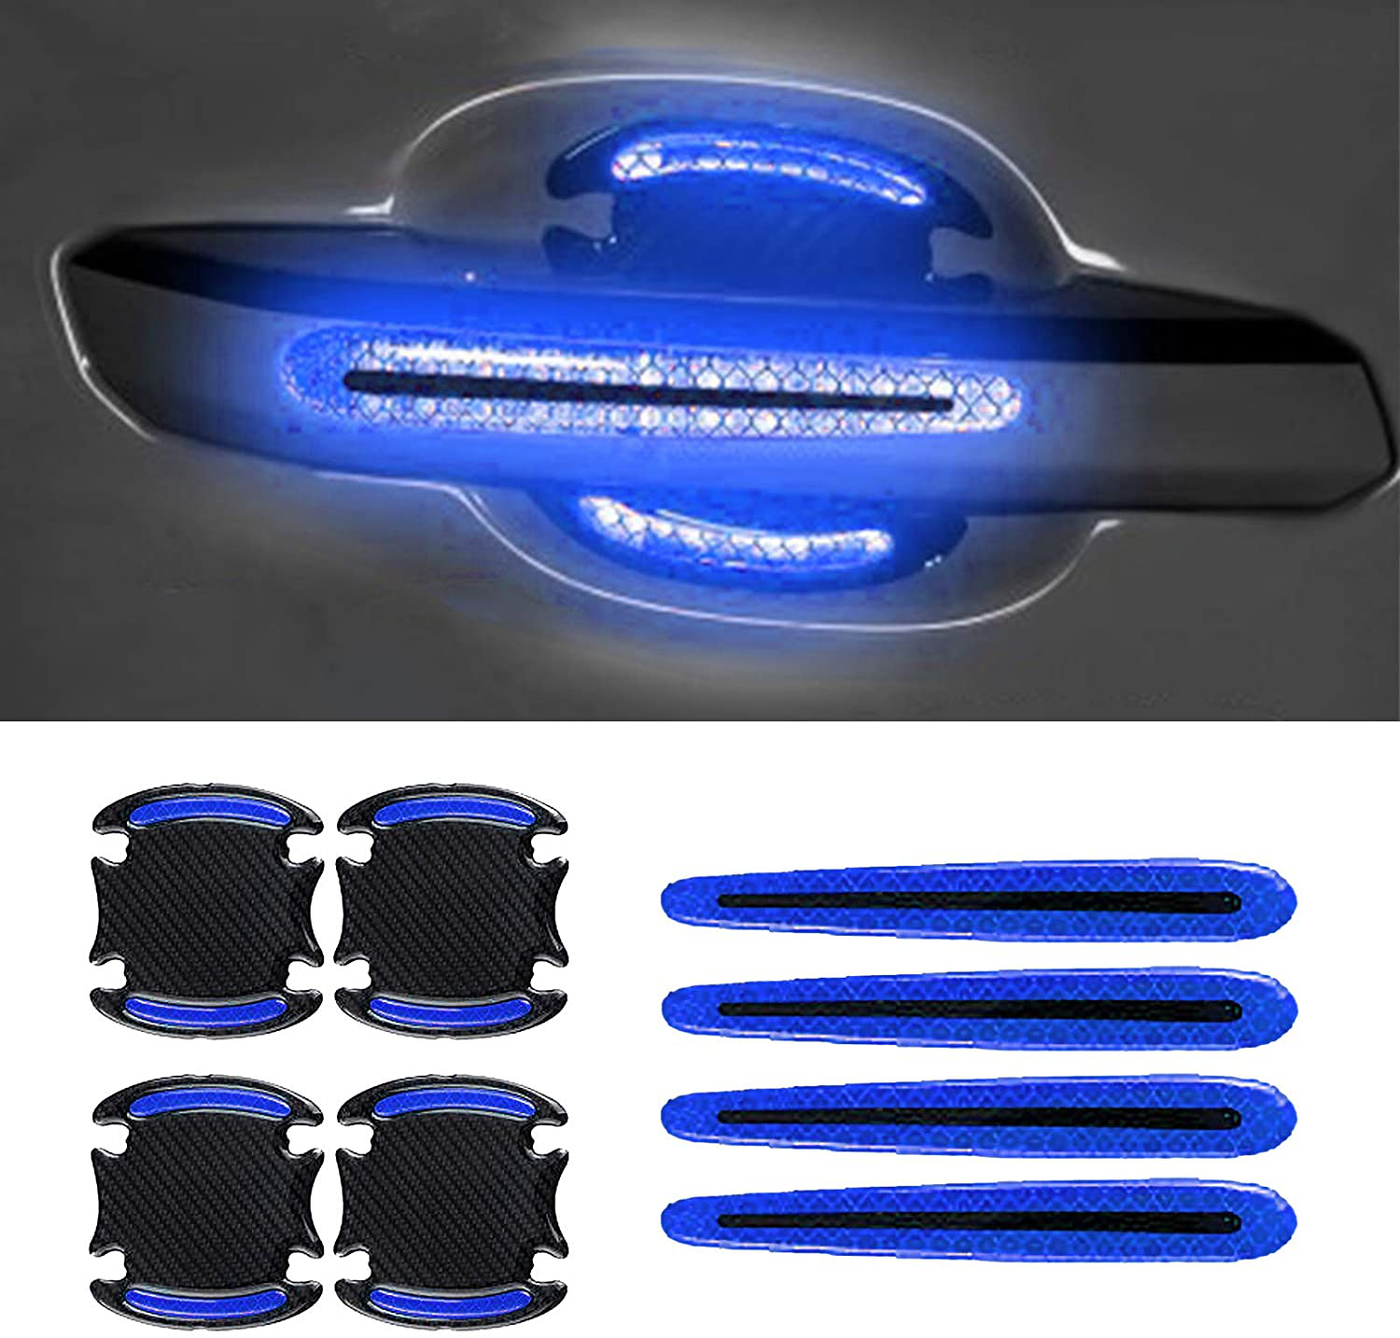 Car Outer Wrist Door Handle Reflective Stickers Universal Safety Reflective Warning Scratch Resistant Stickers 8PCS